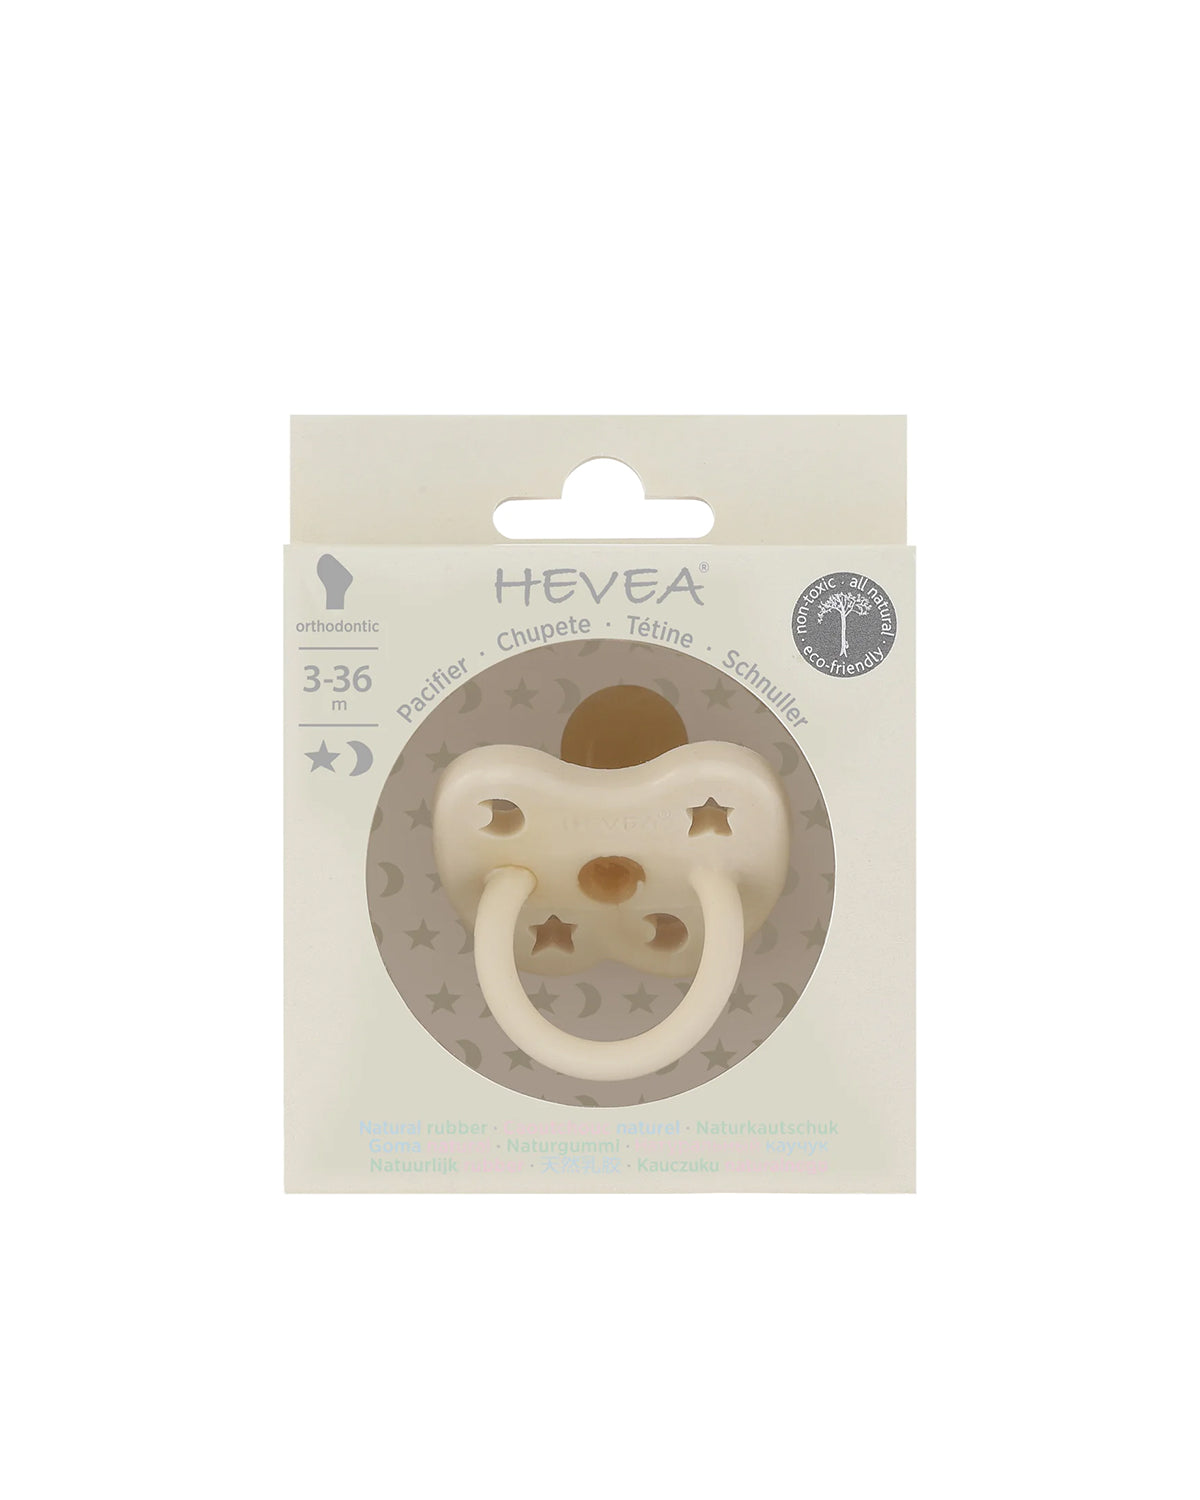 Natural Rubber Pacifier Orthodontic 0-3 Months - cream <br> Hevea